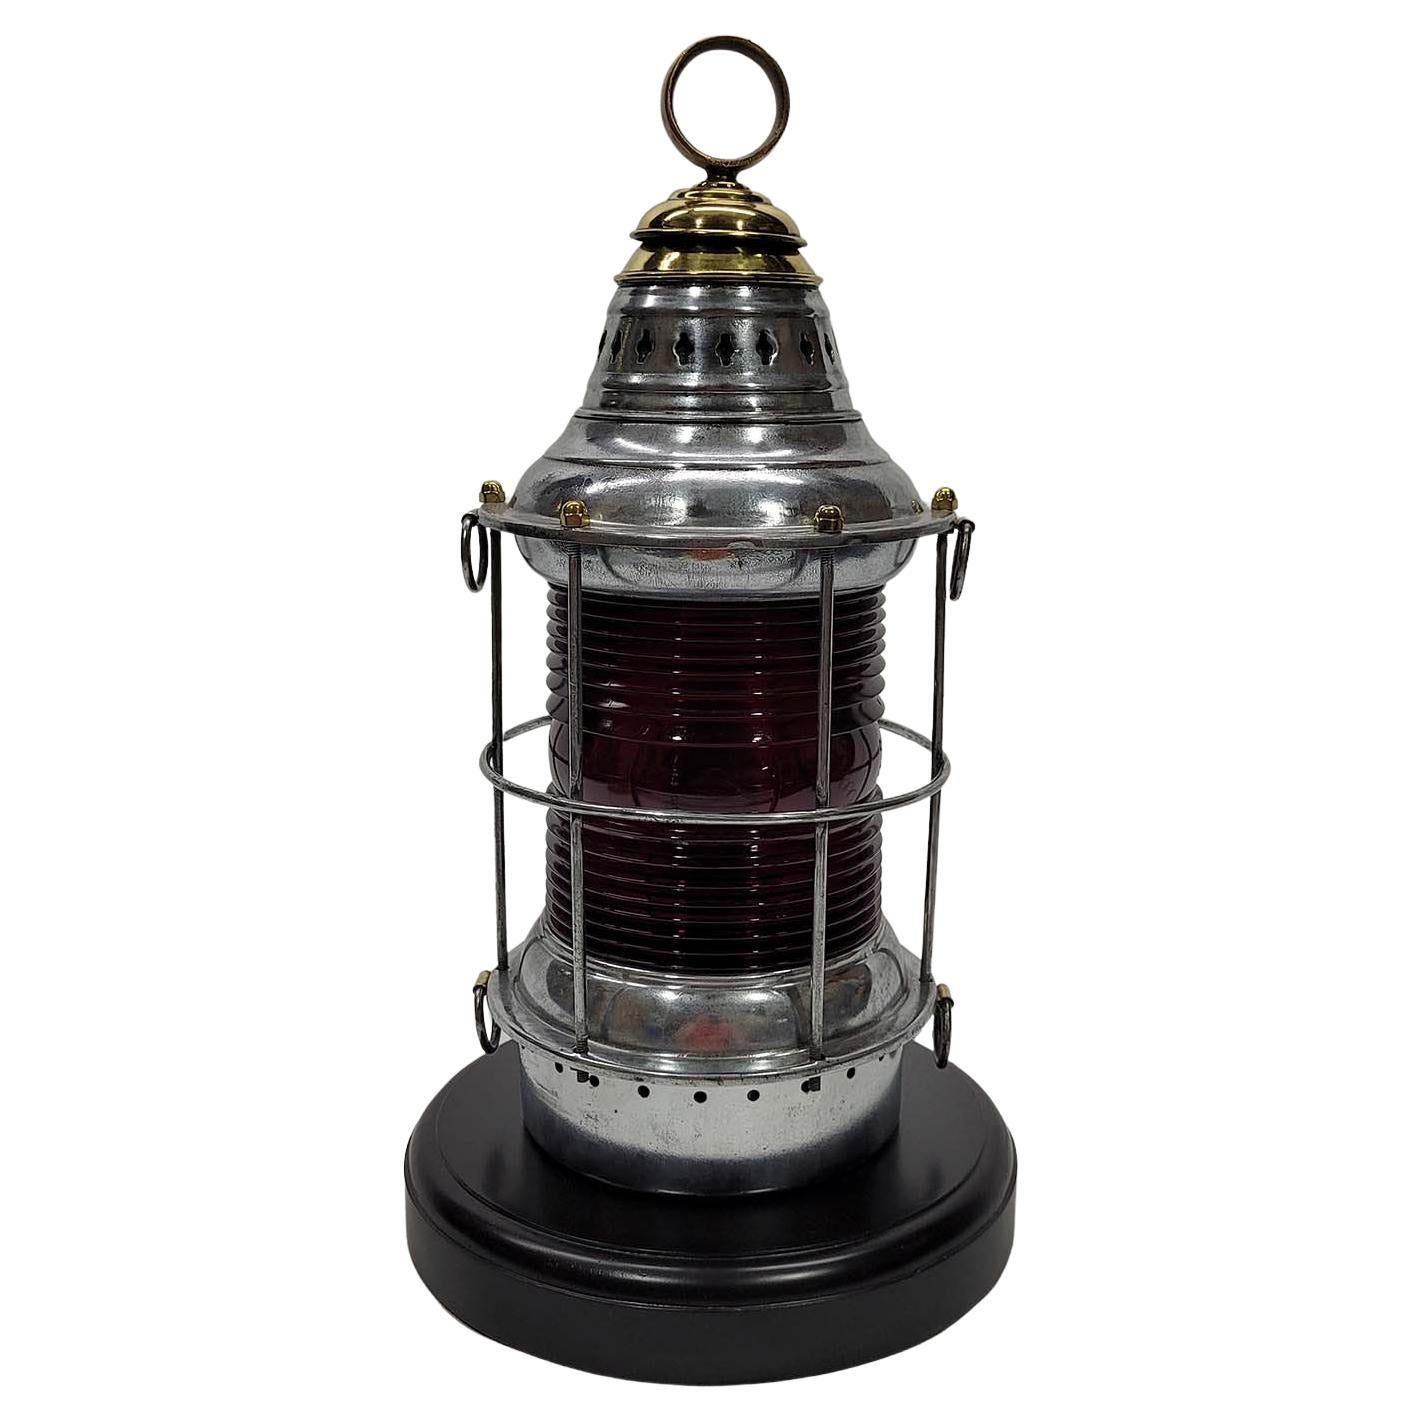 Polished Steel Ships Lantern with Ruby Red Lens